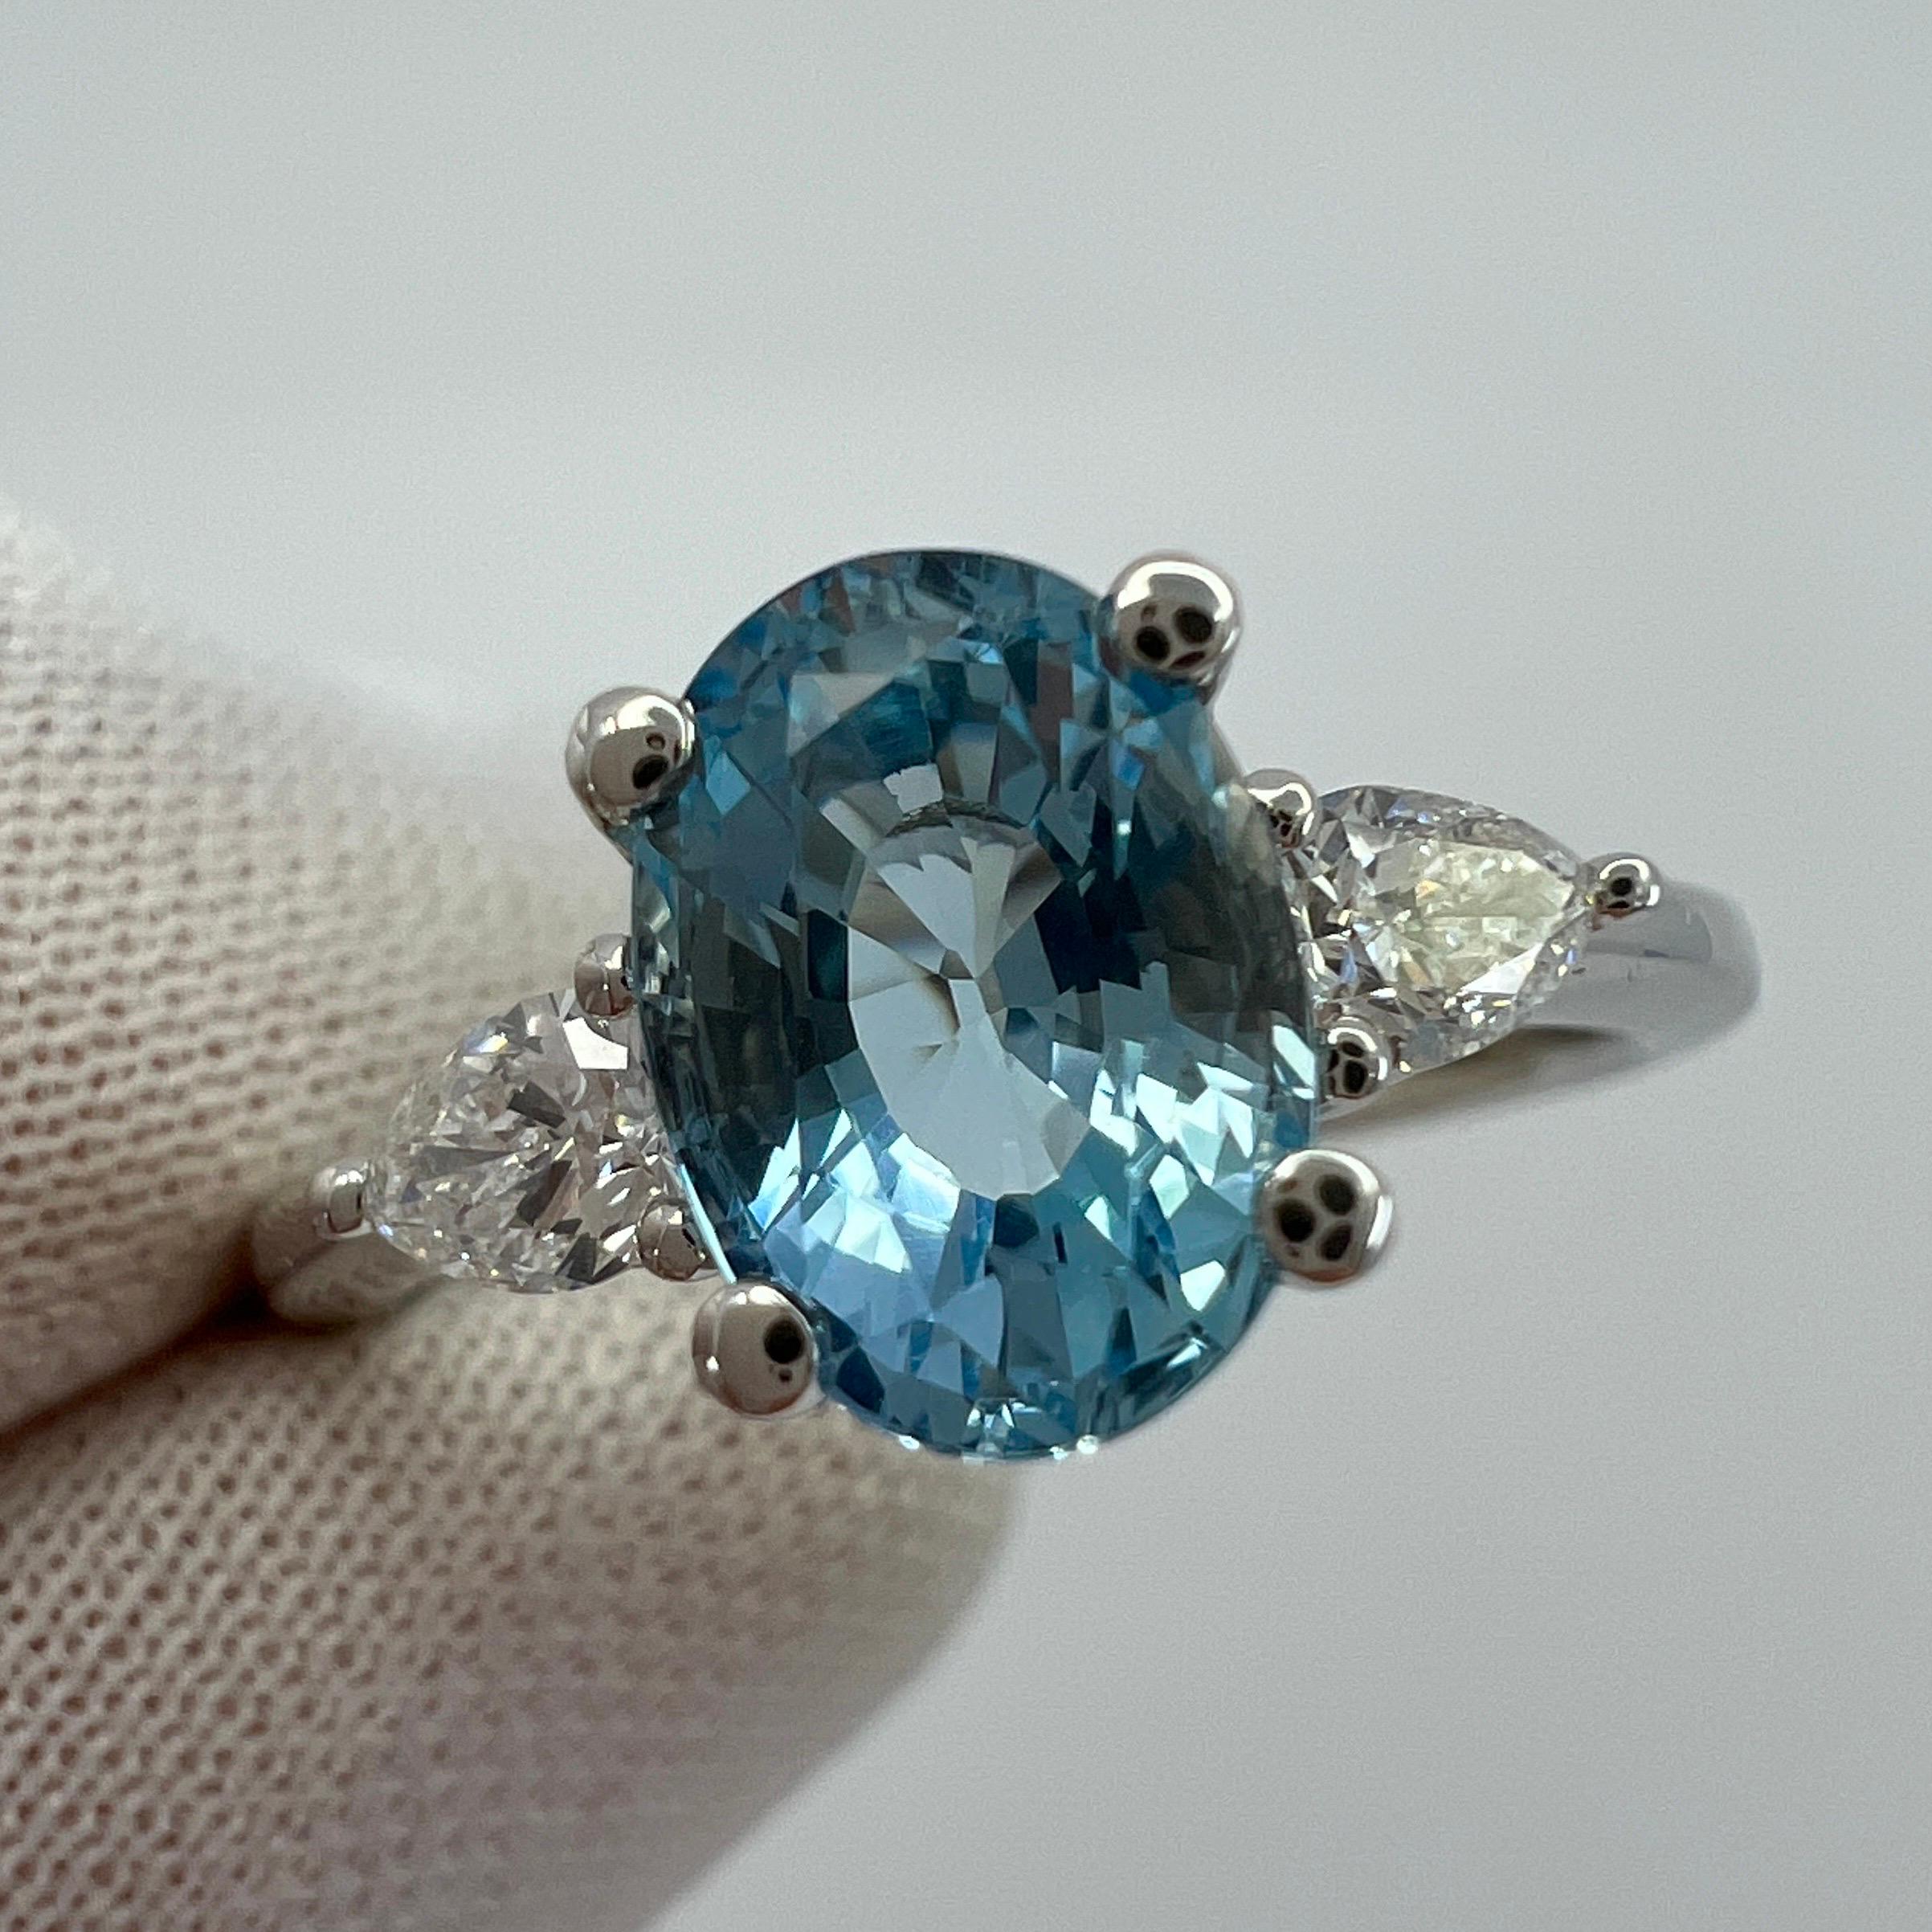 Fine Santa Maria Blue Aquamarine & Diamond 18k White Gold Oval Three Stone Ring.

Stunning 18k white gold ring with a beautiful fine Santa Maria blue aquamarine weighing 1.35ct.
Accented by two matching pear cut diamonds. 0.42ct F/G colour and Si2